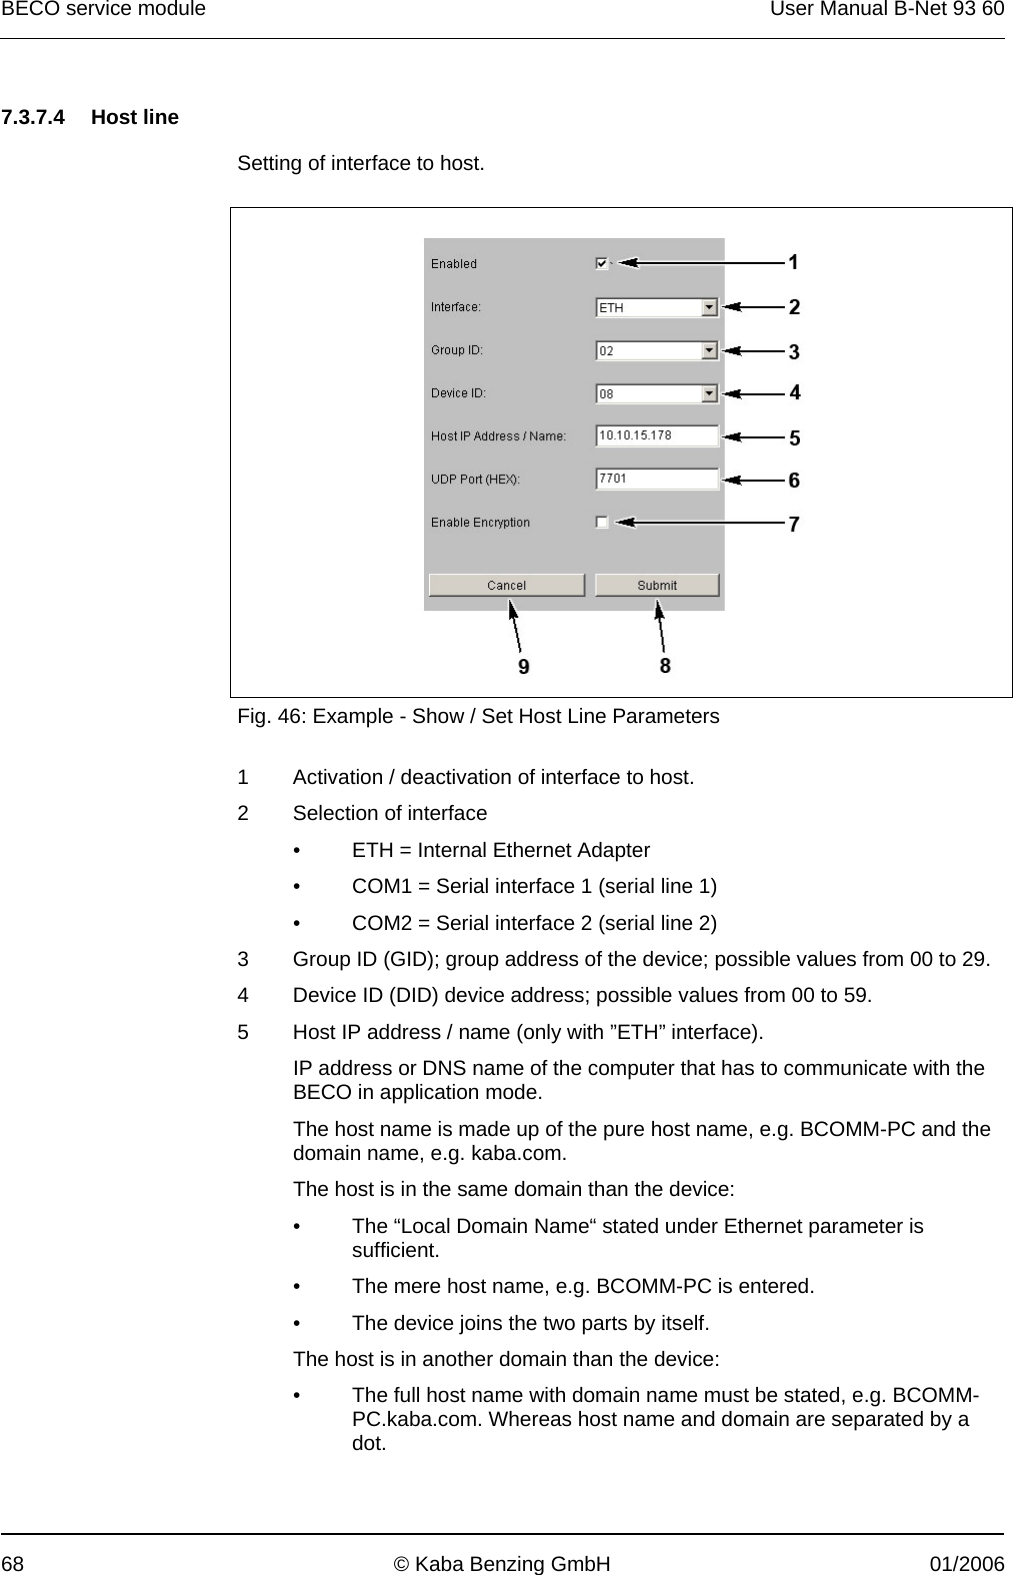 BECO service module  User Manual B-Net 93 60 68  © Kaba Benzing GmbH  01/2006   7.3.7.4 Host line   Setting of interface to host.    Fig. 46: Example - Show / Set Host Line Parameters  1  Activation / deactivation of interface to host. 2  Selection of interface •  ETH = Internal Ethernet Adapter •  COM1 = Serial interface 1 (serial line 1) •  COM2 = Serial interface 2 (serial line 2) 3  Group ID (GID); group address of the device; possible values from 00 to 29. 4  Device ID (DID) device address; possible values from 00 to 59. 5  Host IP address / name (only with ”ETH” interface). IP address or DNS name of the computer that has to communicate with the BECO in application mode. The host name is made up of the pure host name, e.g. BCOMM-PC and the domain name, e.g. kaba.com. The host is in the same domain than the device: •  The “Local Domain Name“ stated under Ethernet parameter is sufficient. •  The mere host name, e.g. BCOMM-PC is entered. •  The device joins the two parts by itself. The host is in another domain than the device: •  The full host name with domain name must be stated, e.g. BCOMM-PC.kaba.com. Whereas host name and domain are separated by a dot. 